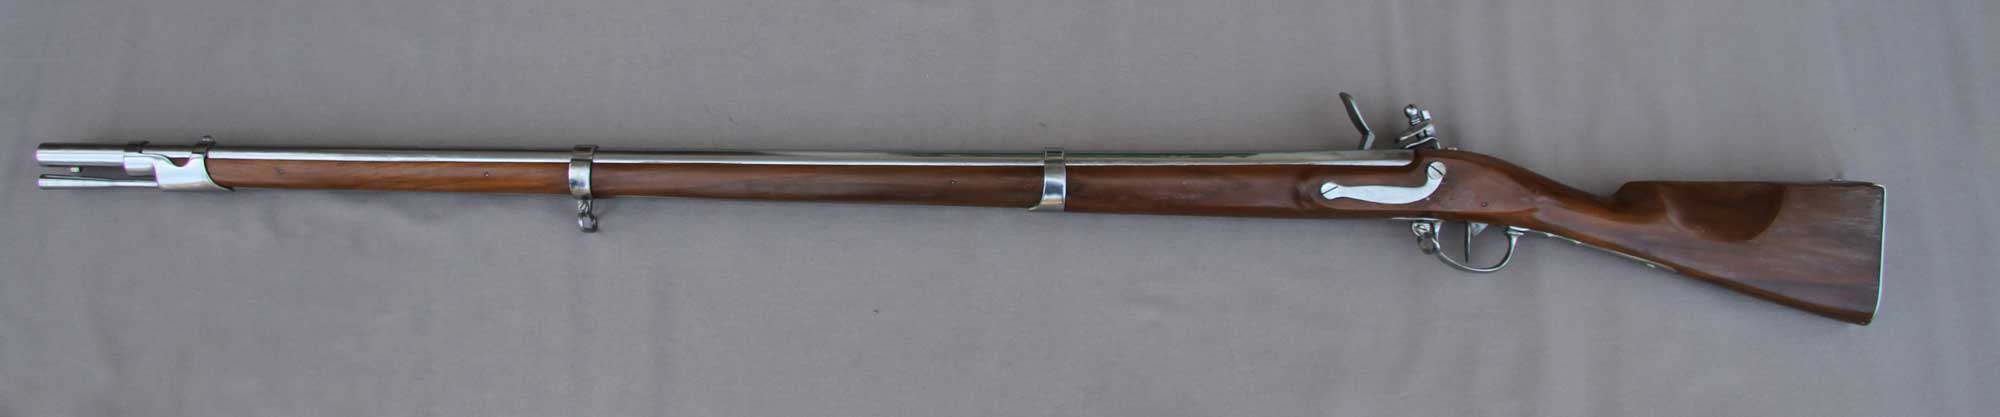 French, 1777 Charleville (AN IX) musket